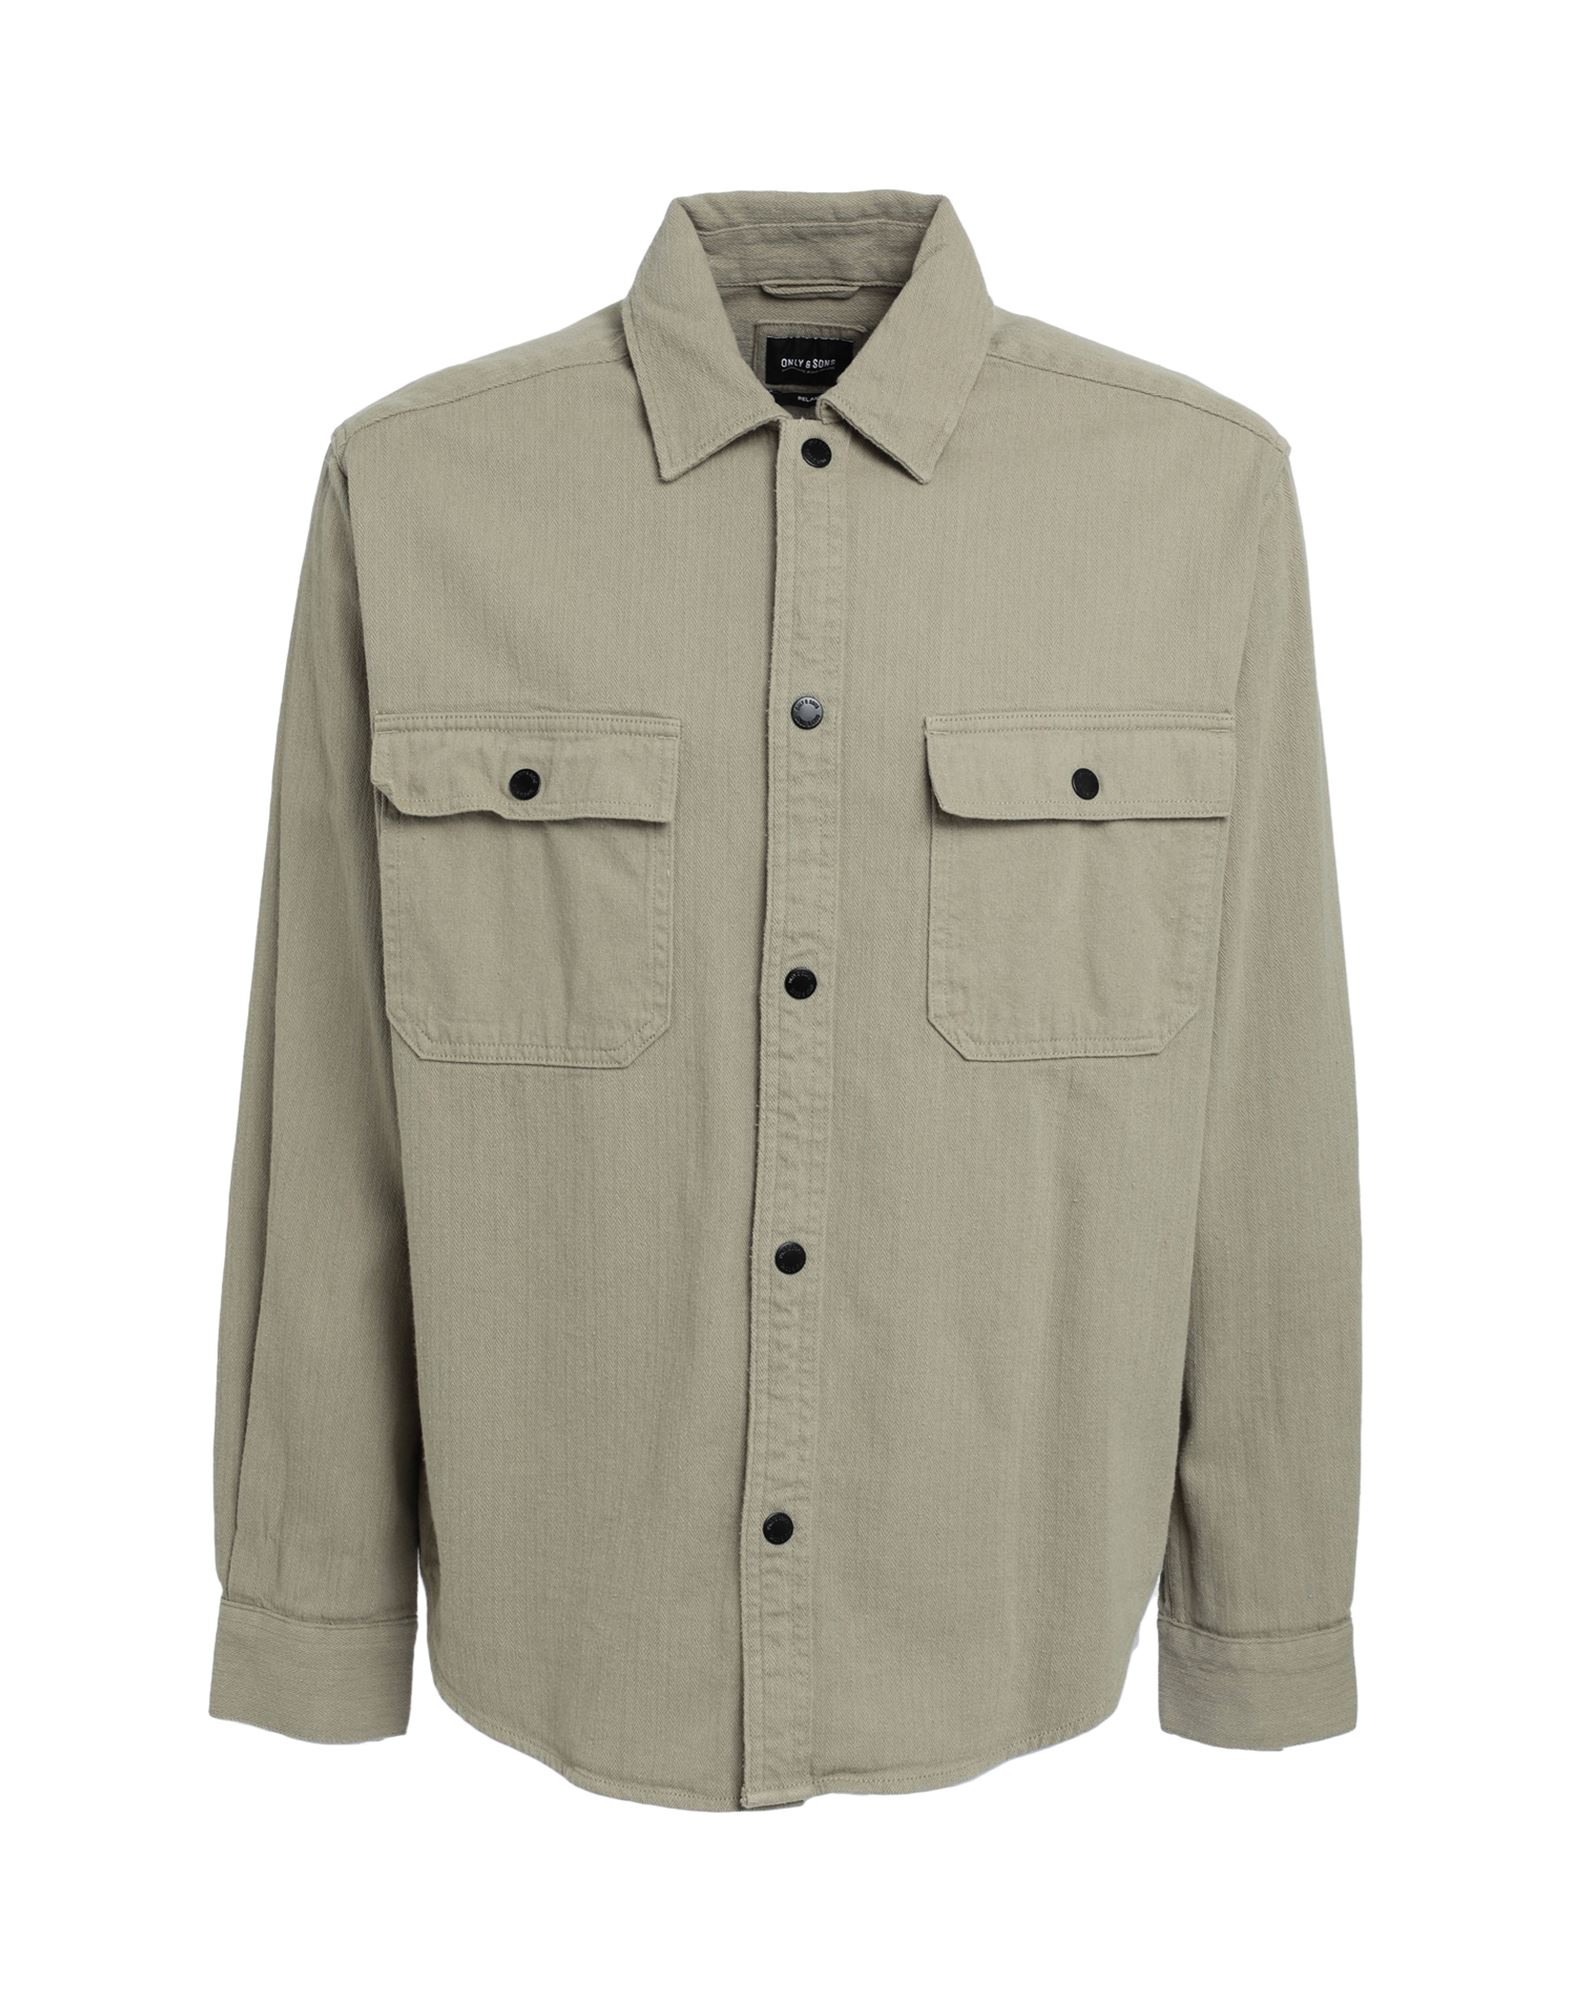 ONLY & SONS ONLY & SONS MAN SHIRT SAGE GREEN SIZE S COTTON